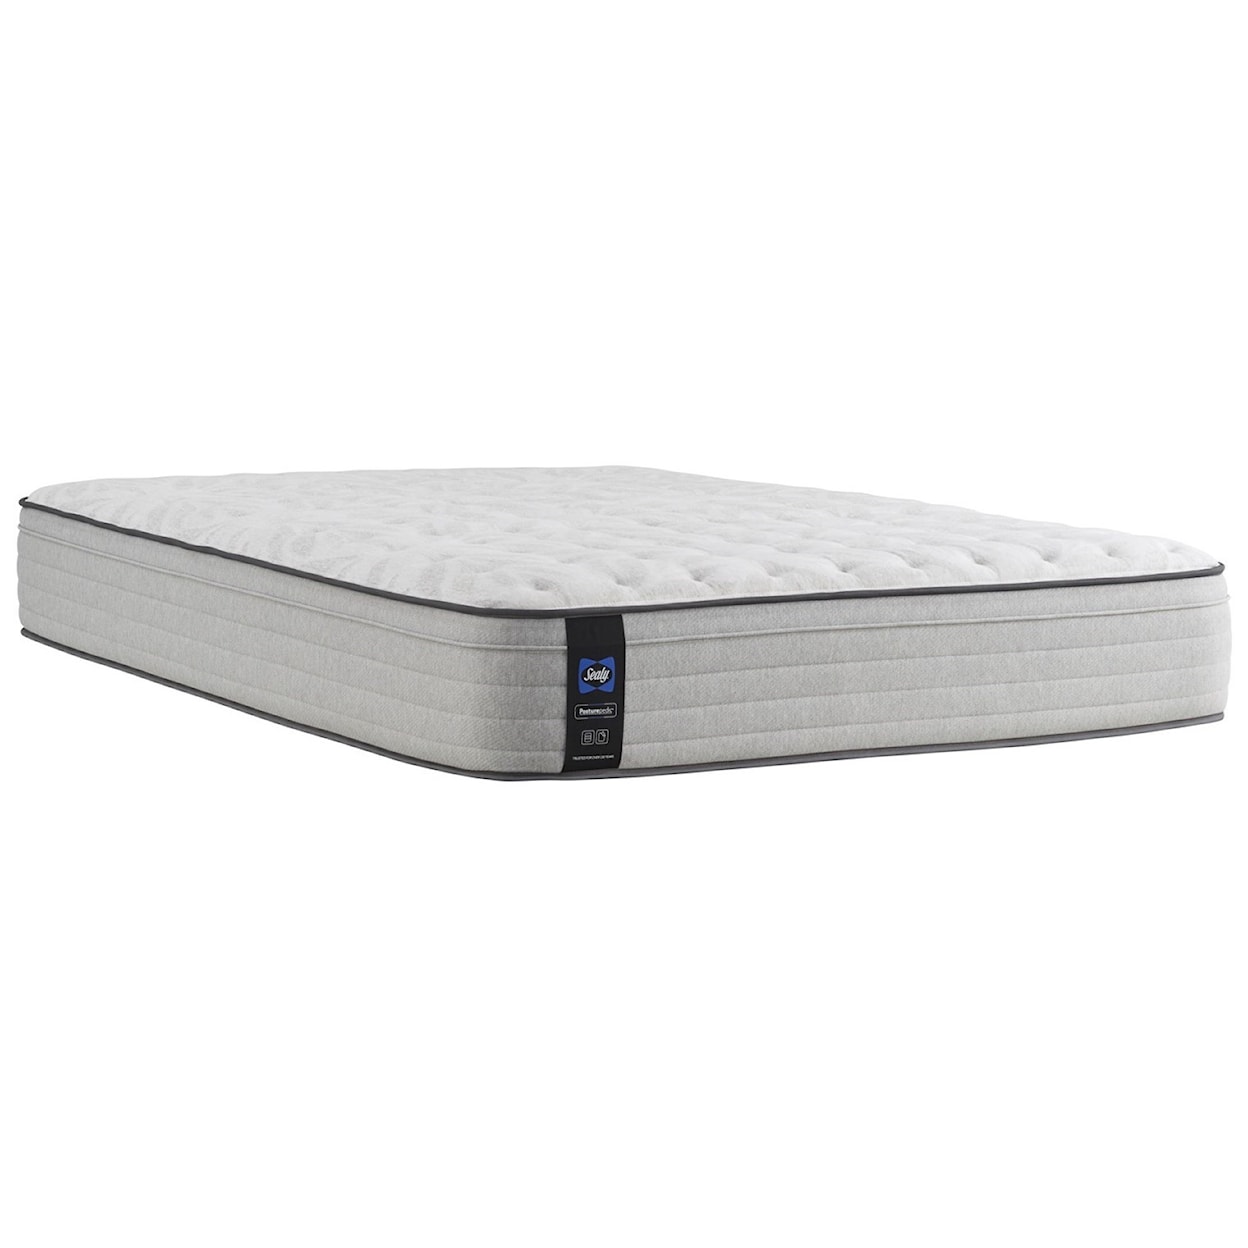 Sealy PPS3 Posturpedic Innerspring Soft FXET Queen 13" Soft Faux Euro Top Mattress